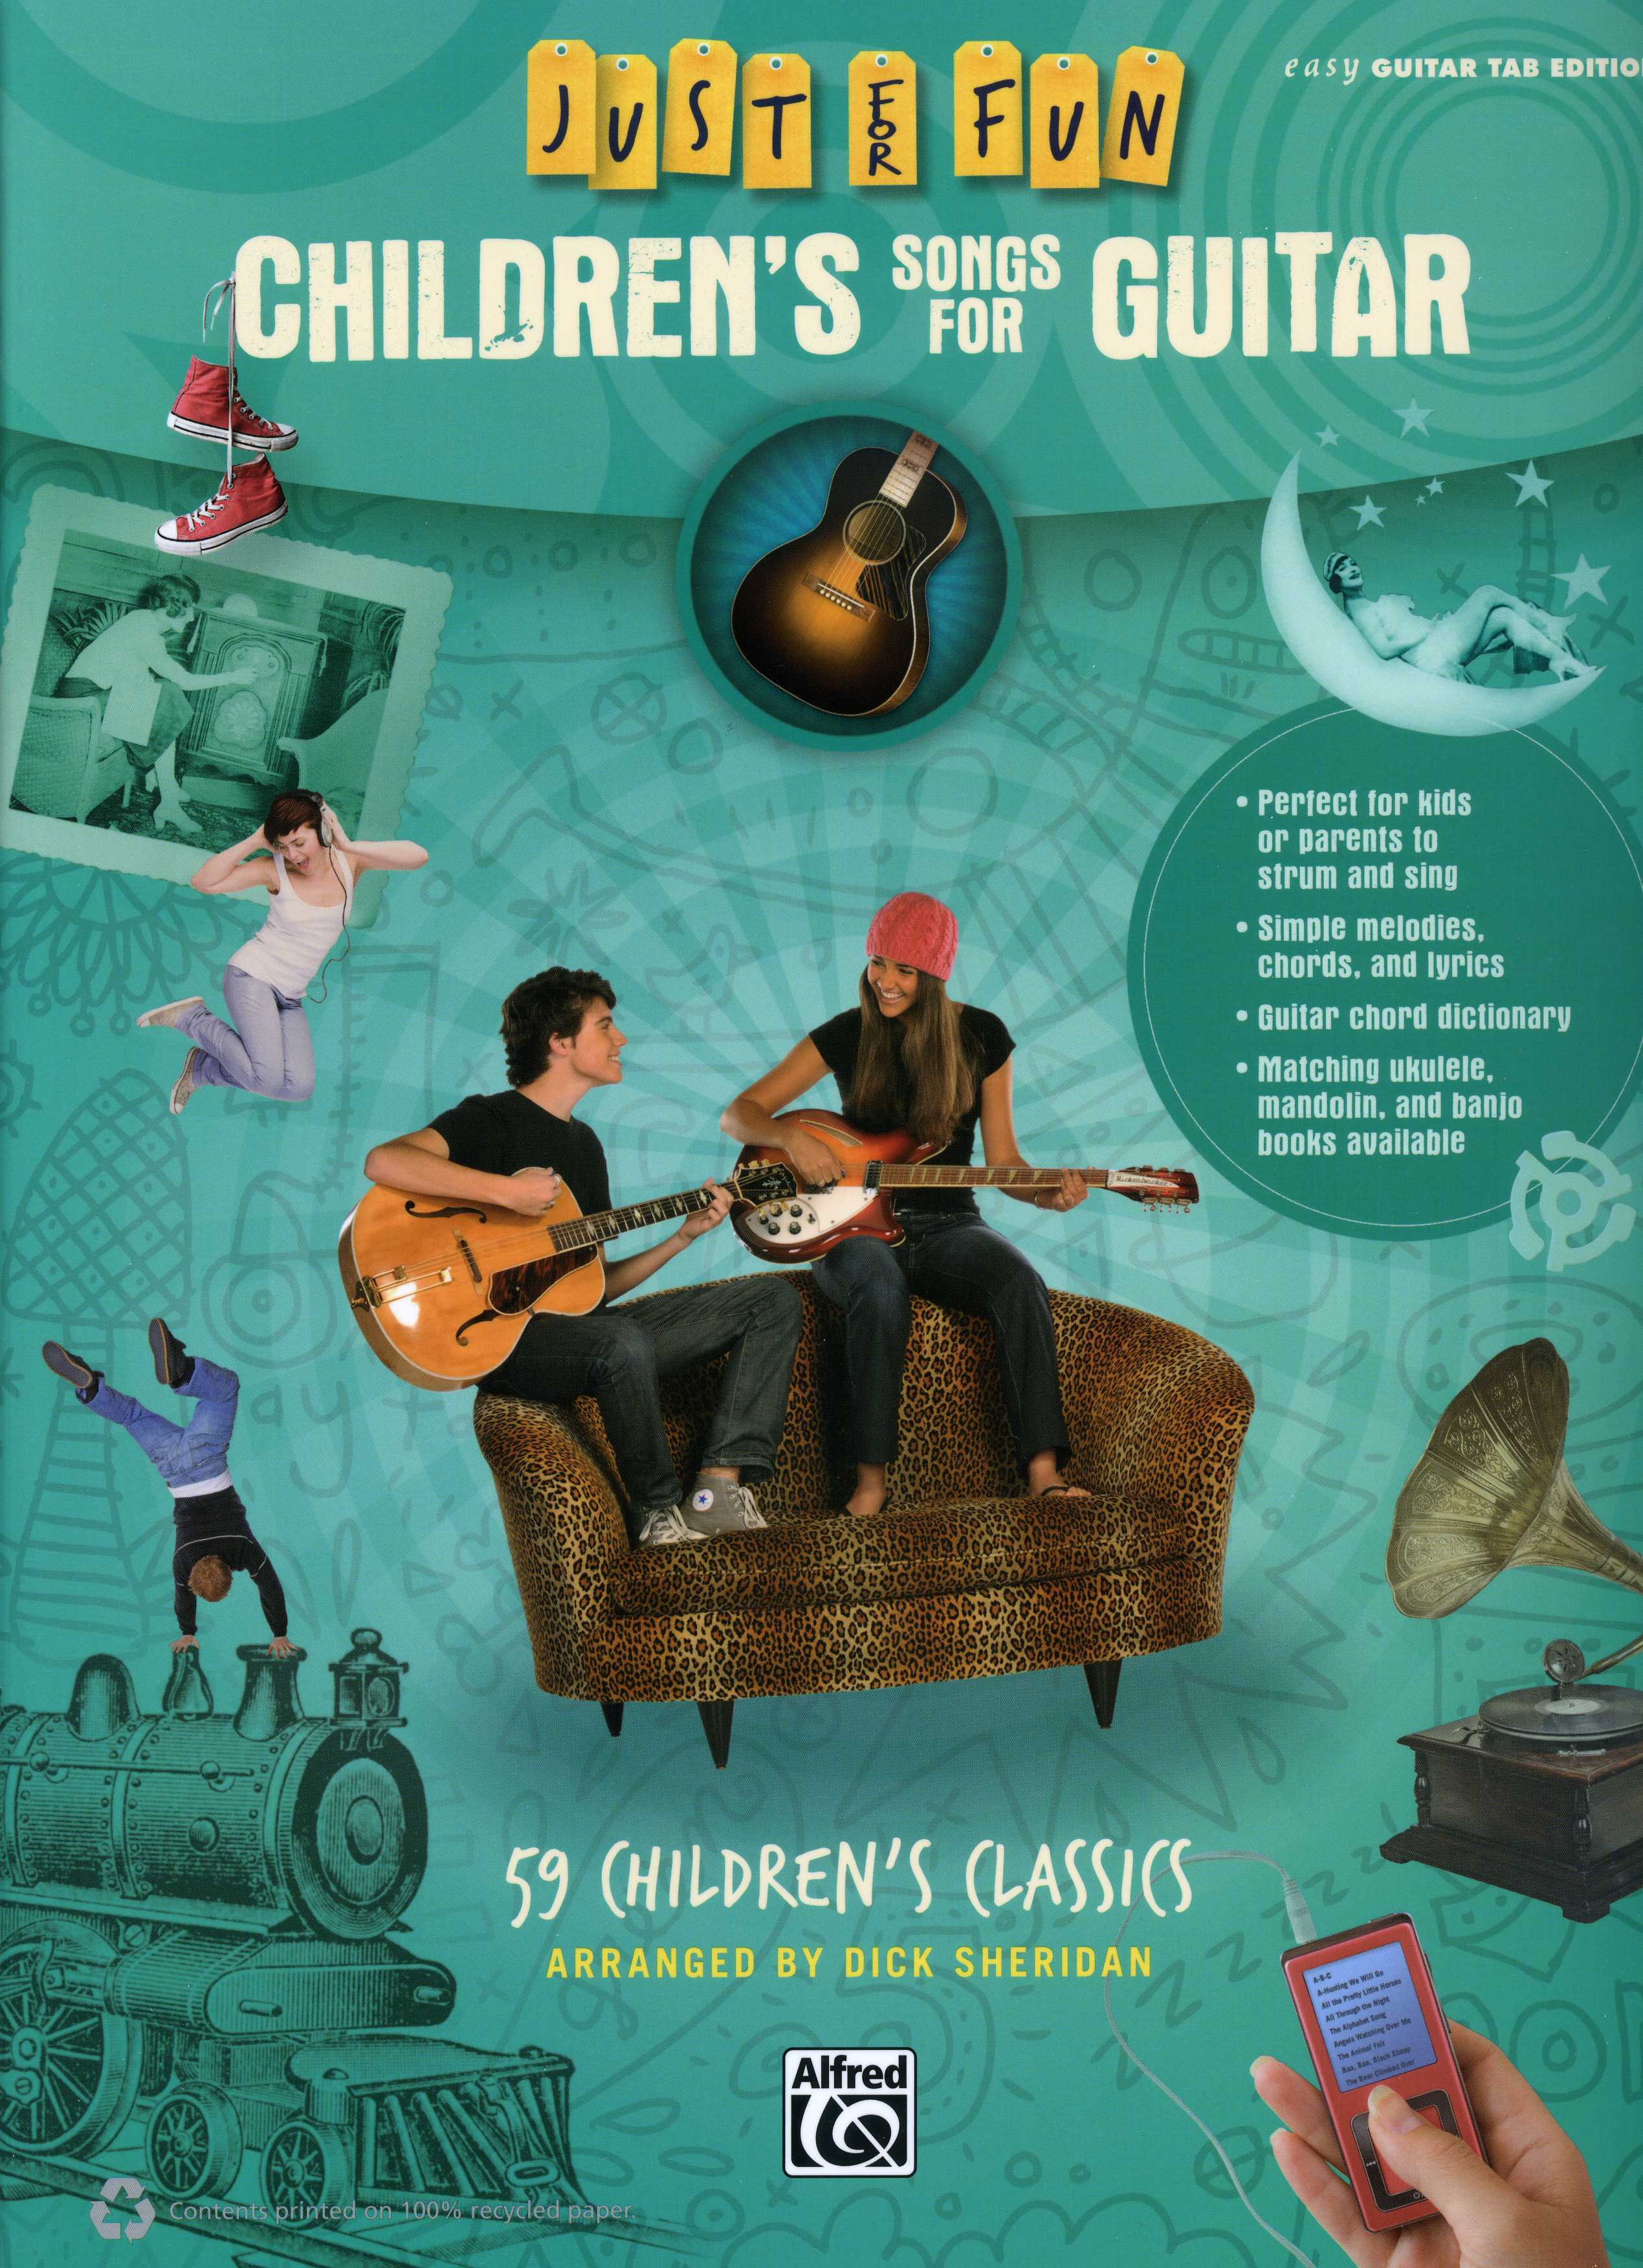 Just For Fun - Children'S Songs For Guitar